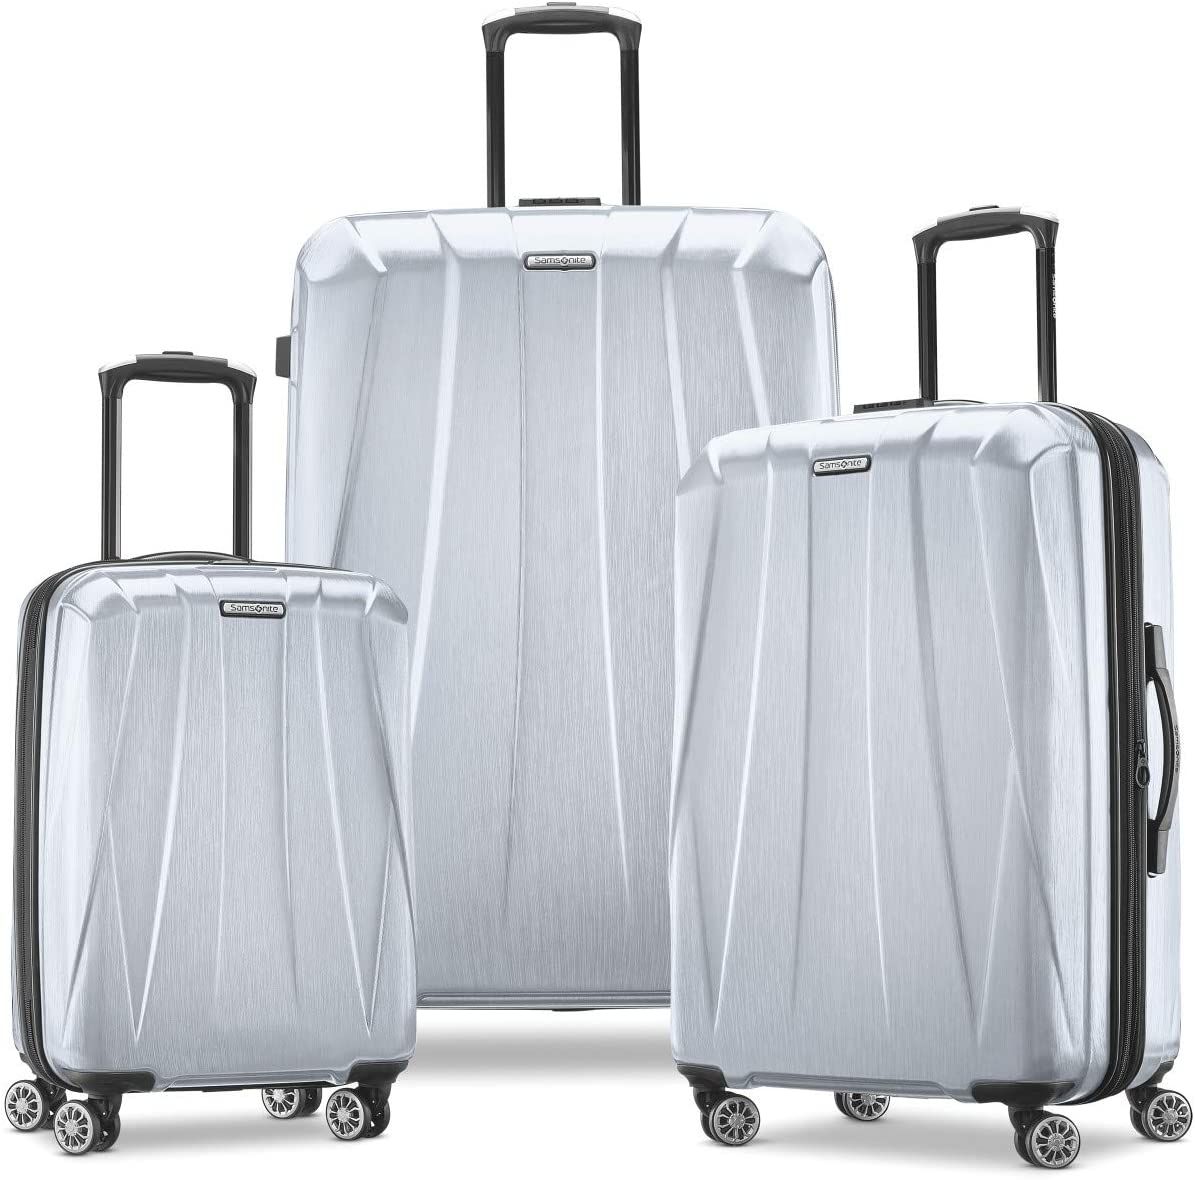 Samsonite Centric 2 Hardside Expandable Luggage with Spinners, Silver, 3-Piece Set (20/24/28) | Amazon (US)